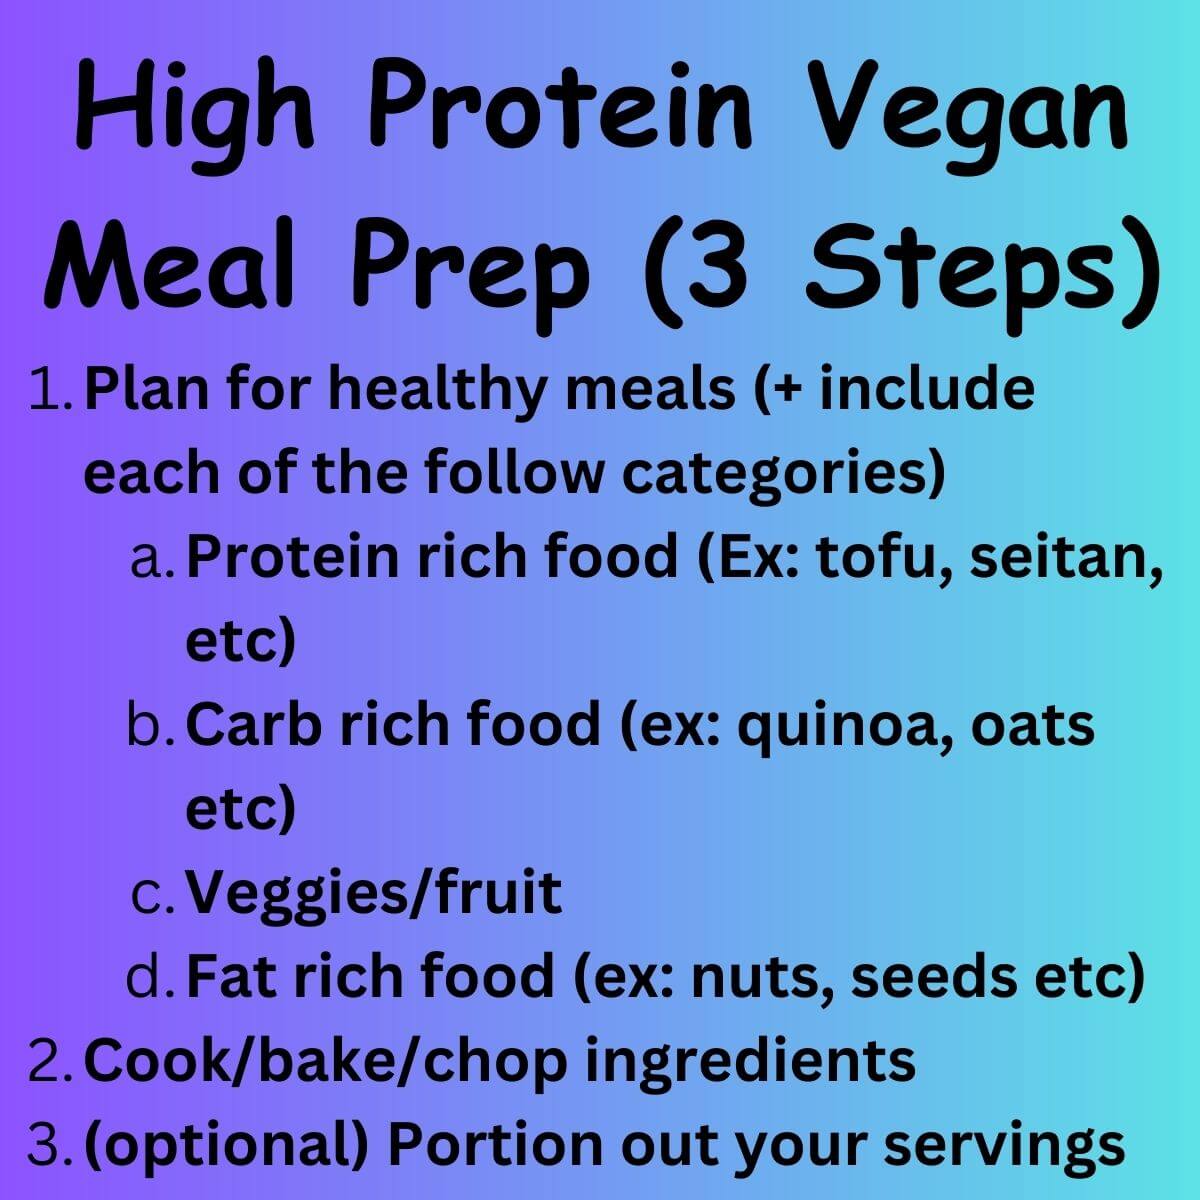 Text reads: High protein vegan meal prep (3 steps) 
The steps are summarized (also are written in the bottom text).